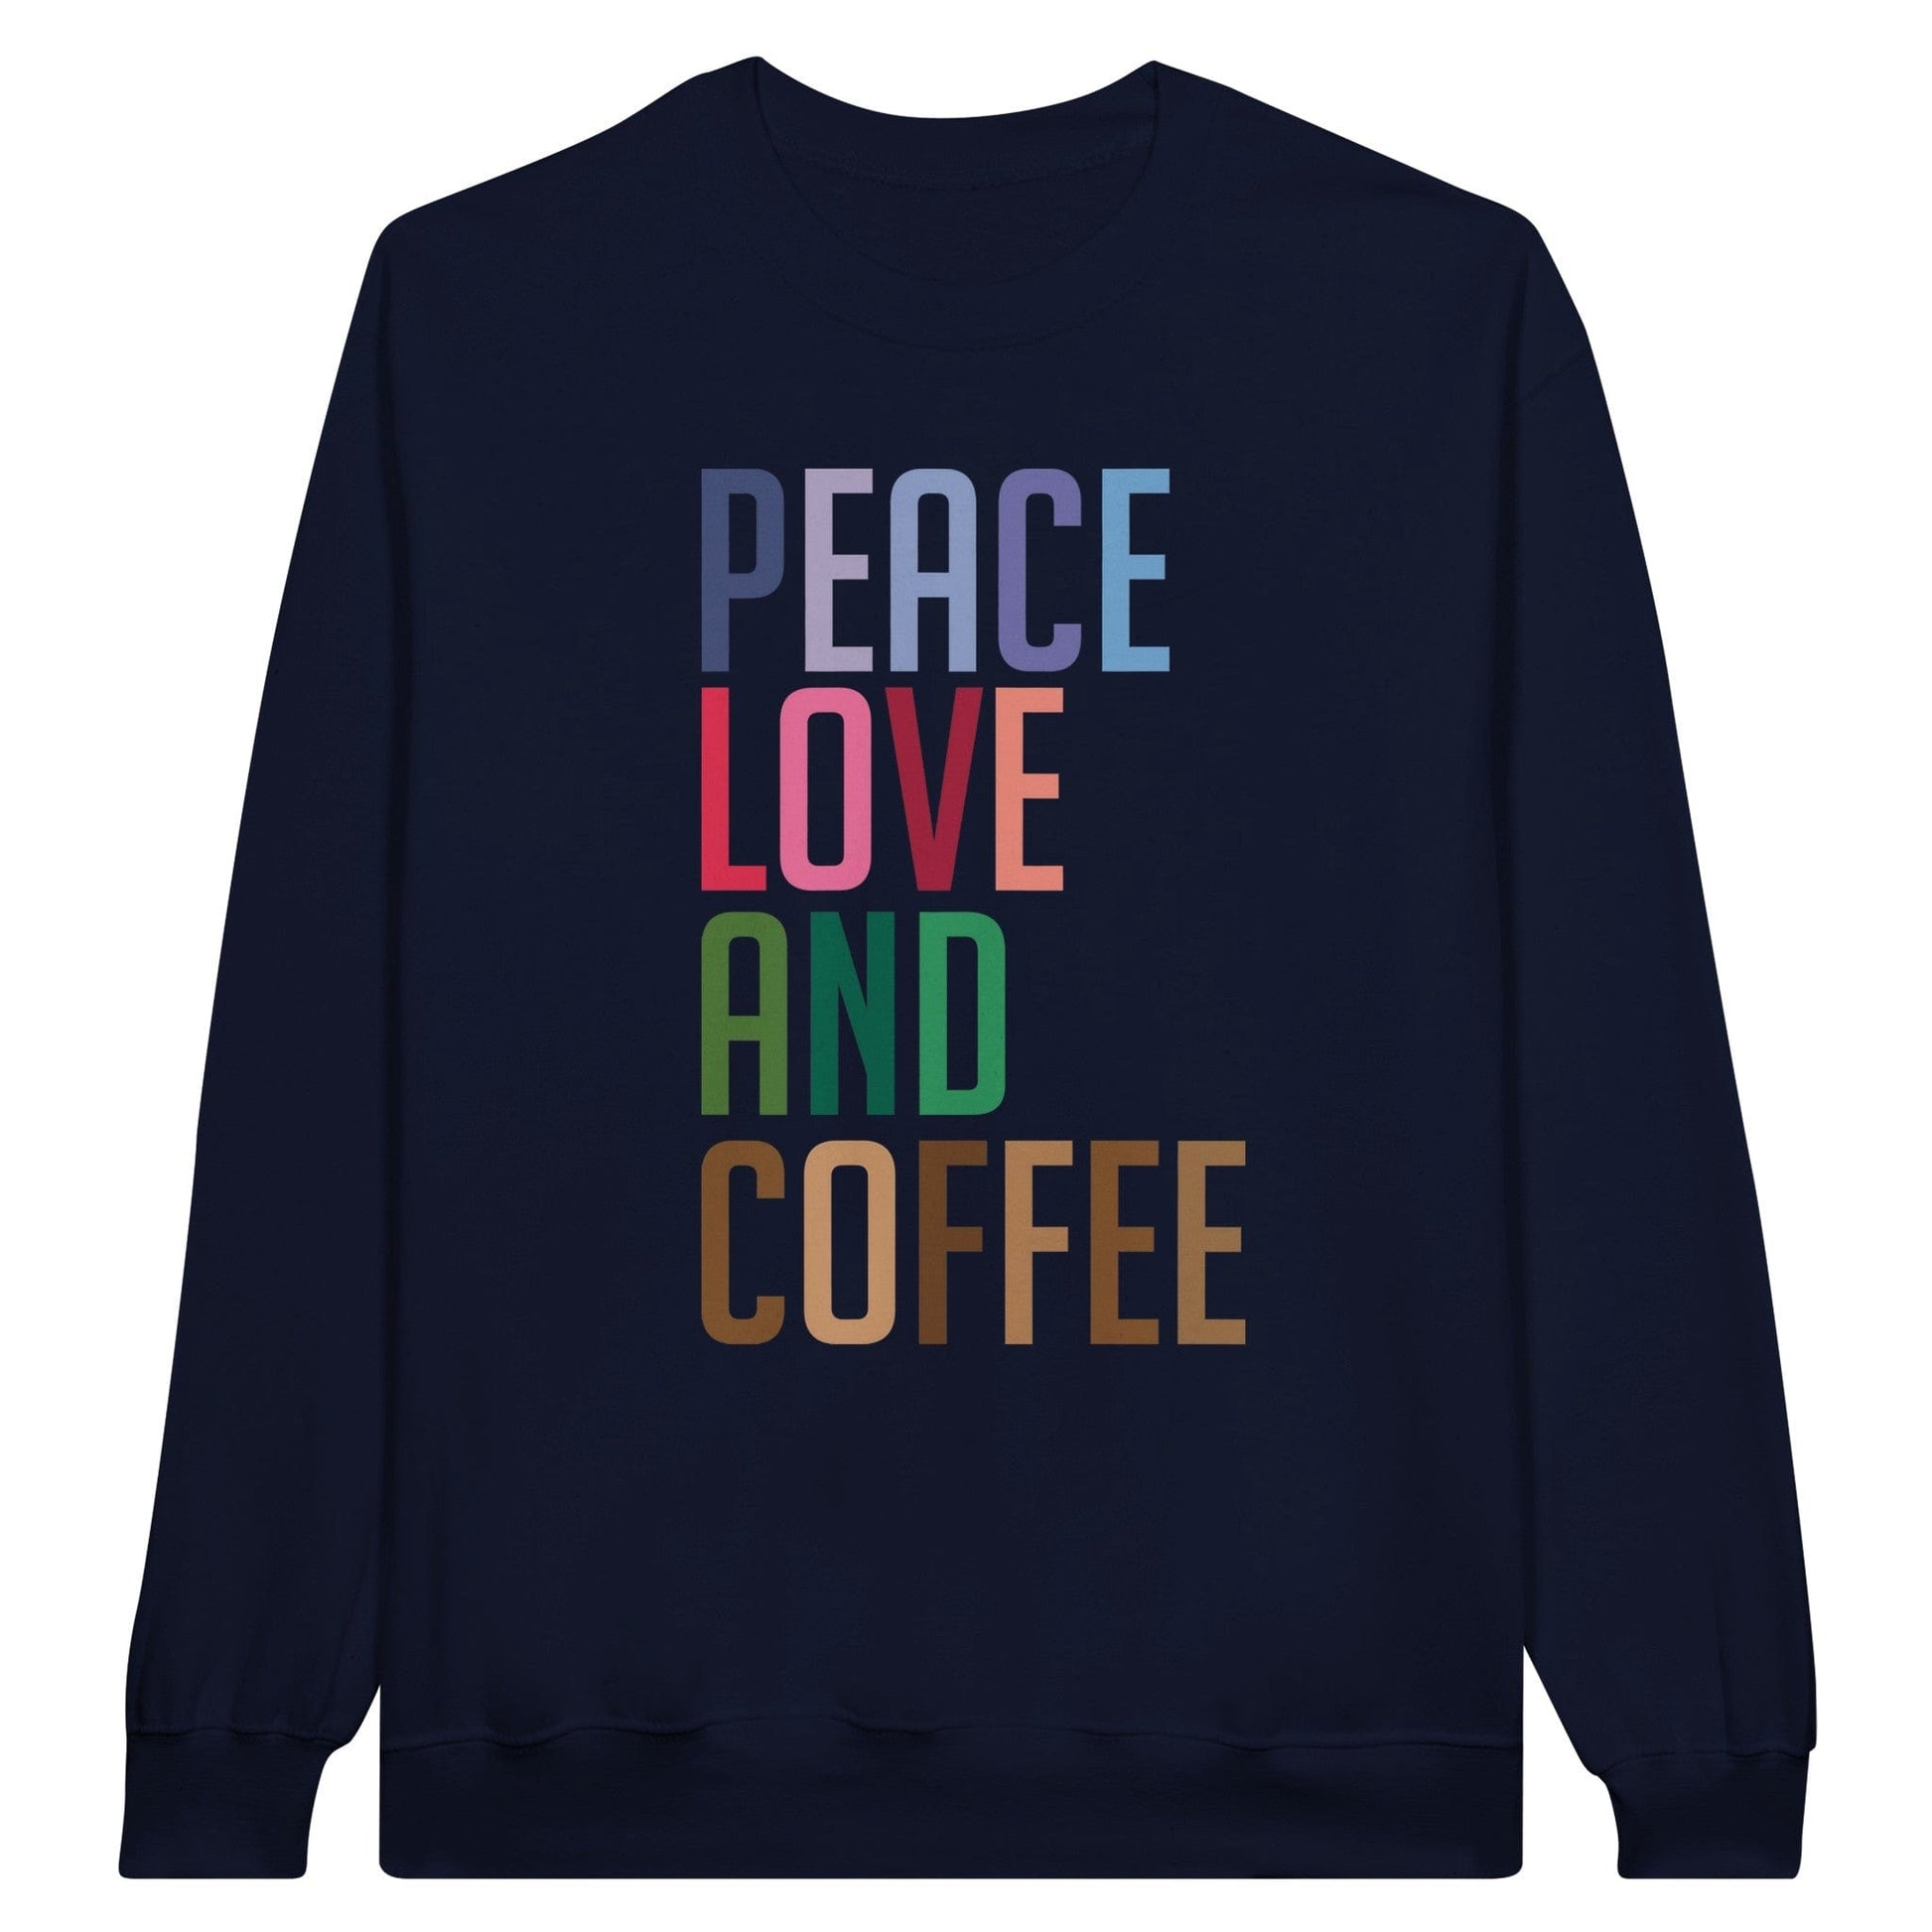 Good Bean Gifts Copy of "Peace Love and Coffee" - Classic Unisex Crewneck Sweatshirt S / Navy